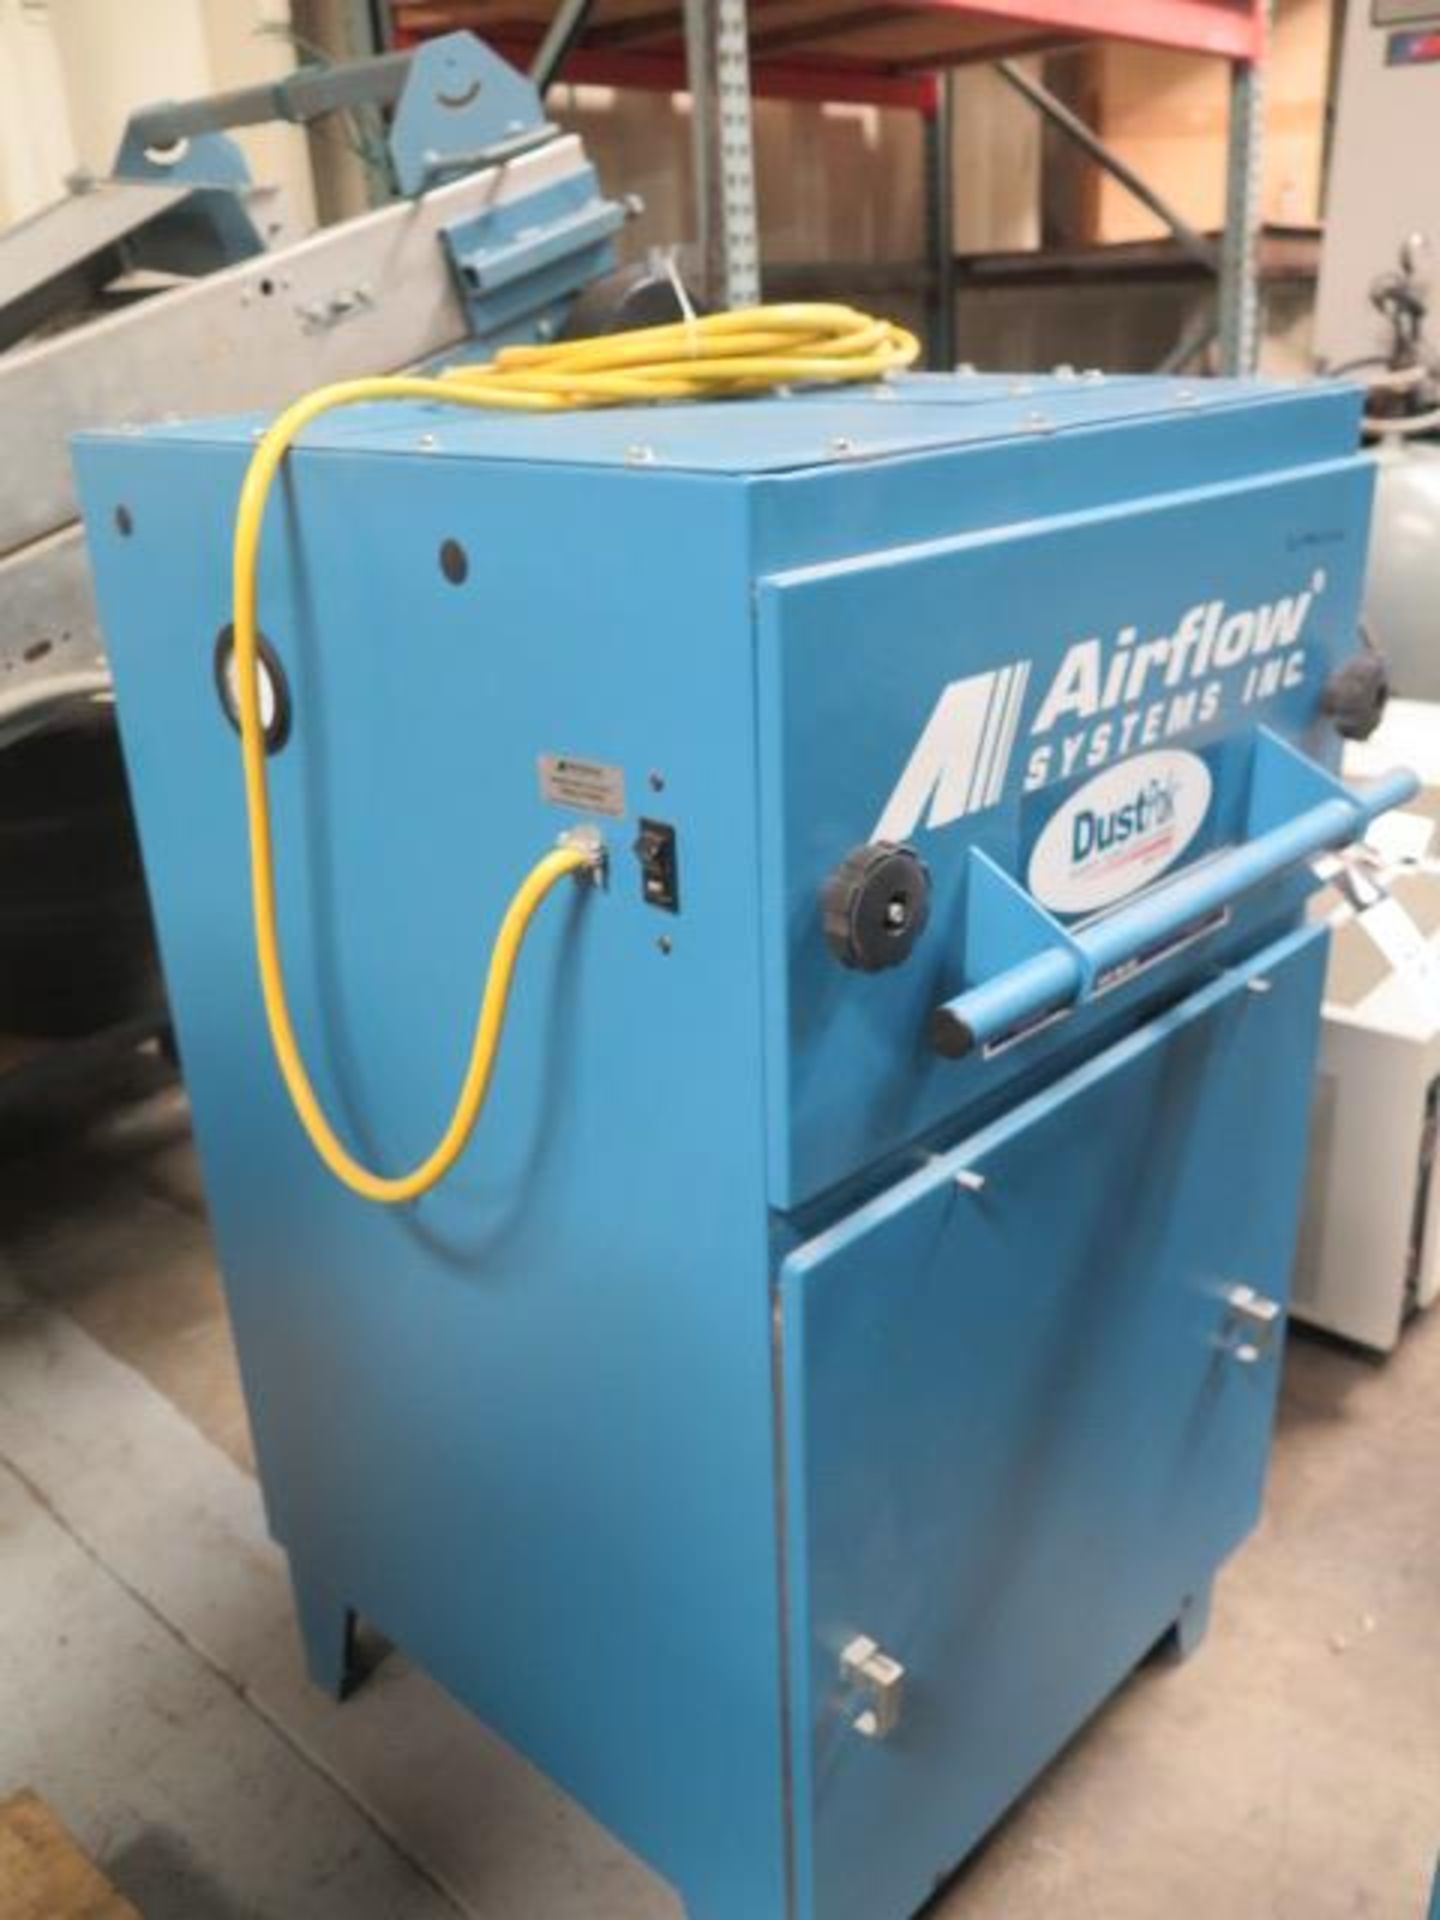 Airflow mdl. DS-1-SHAKER-PG5 "Dust PAK" Dust Collector (SOLD AS-IS - NO WARRANTY) - Image 2 of 4